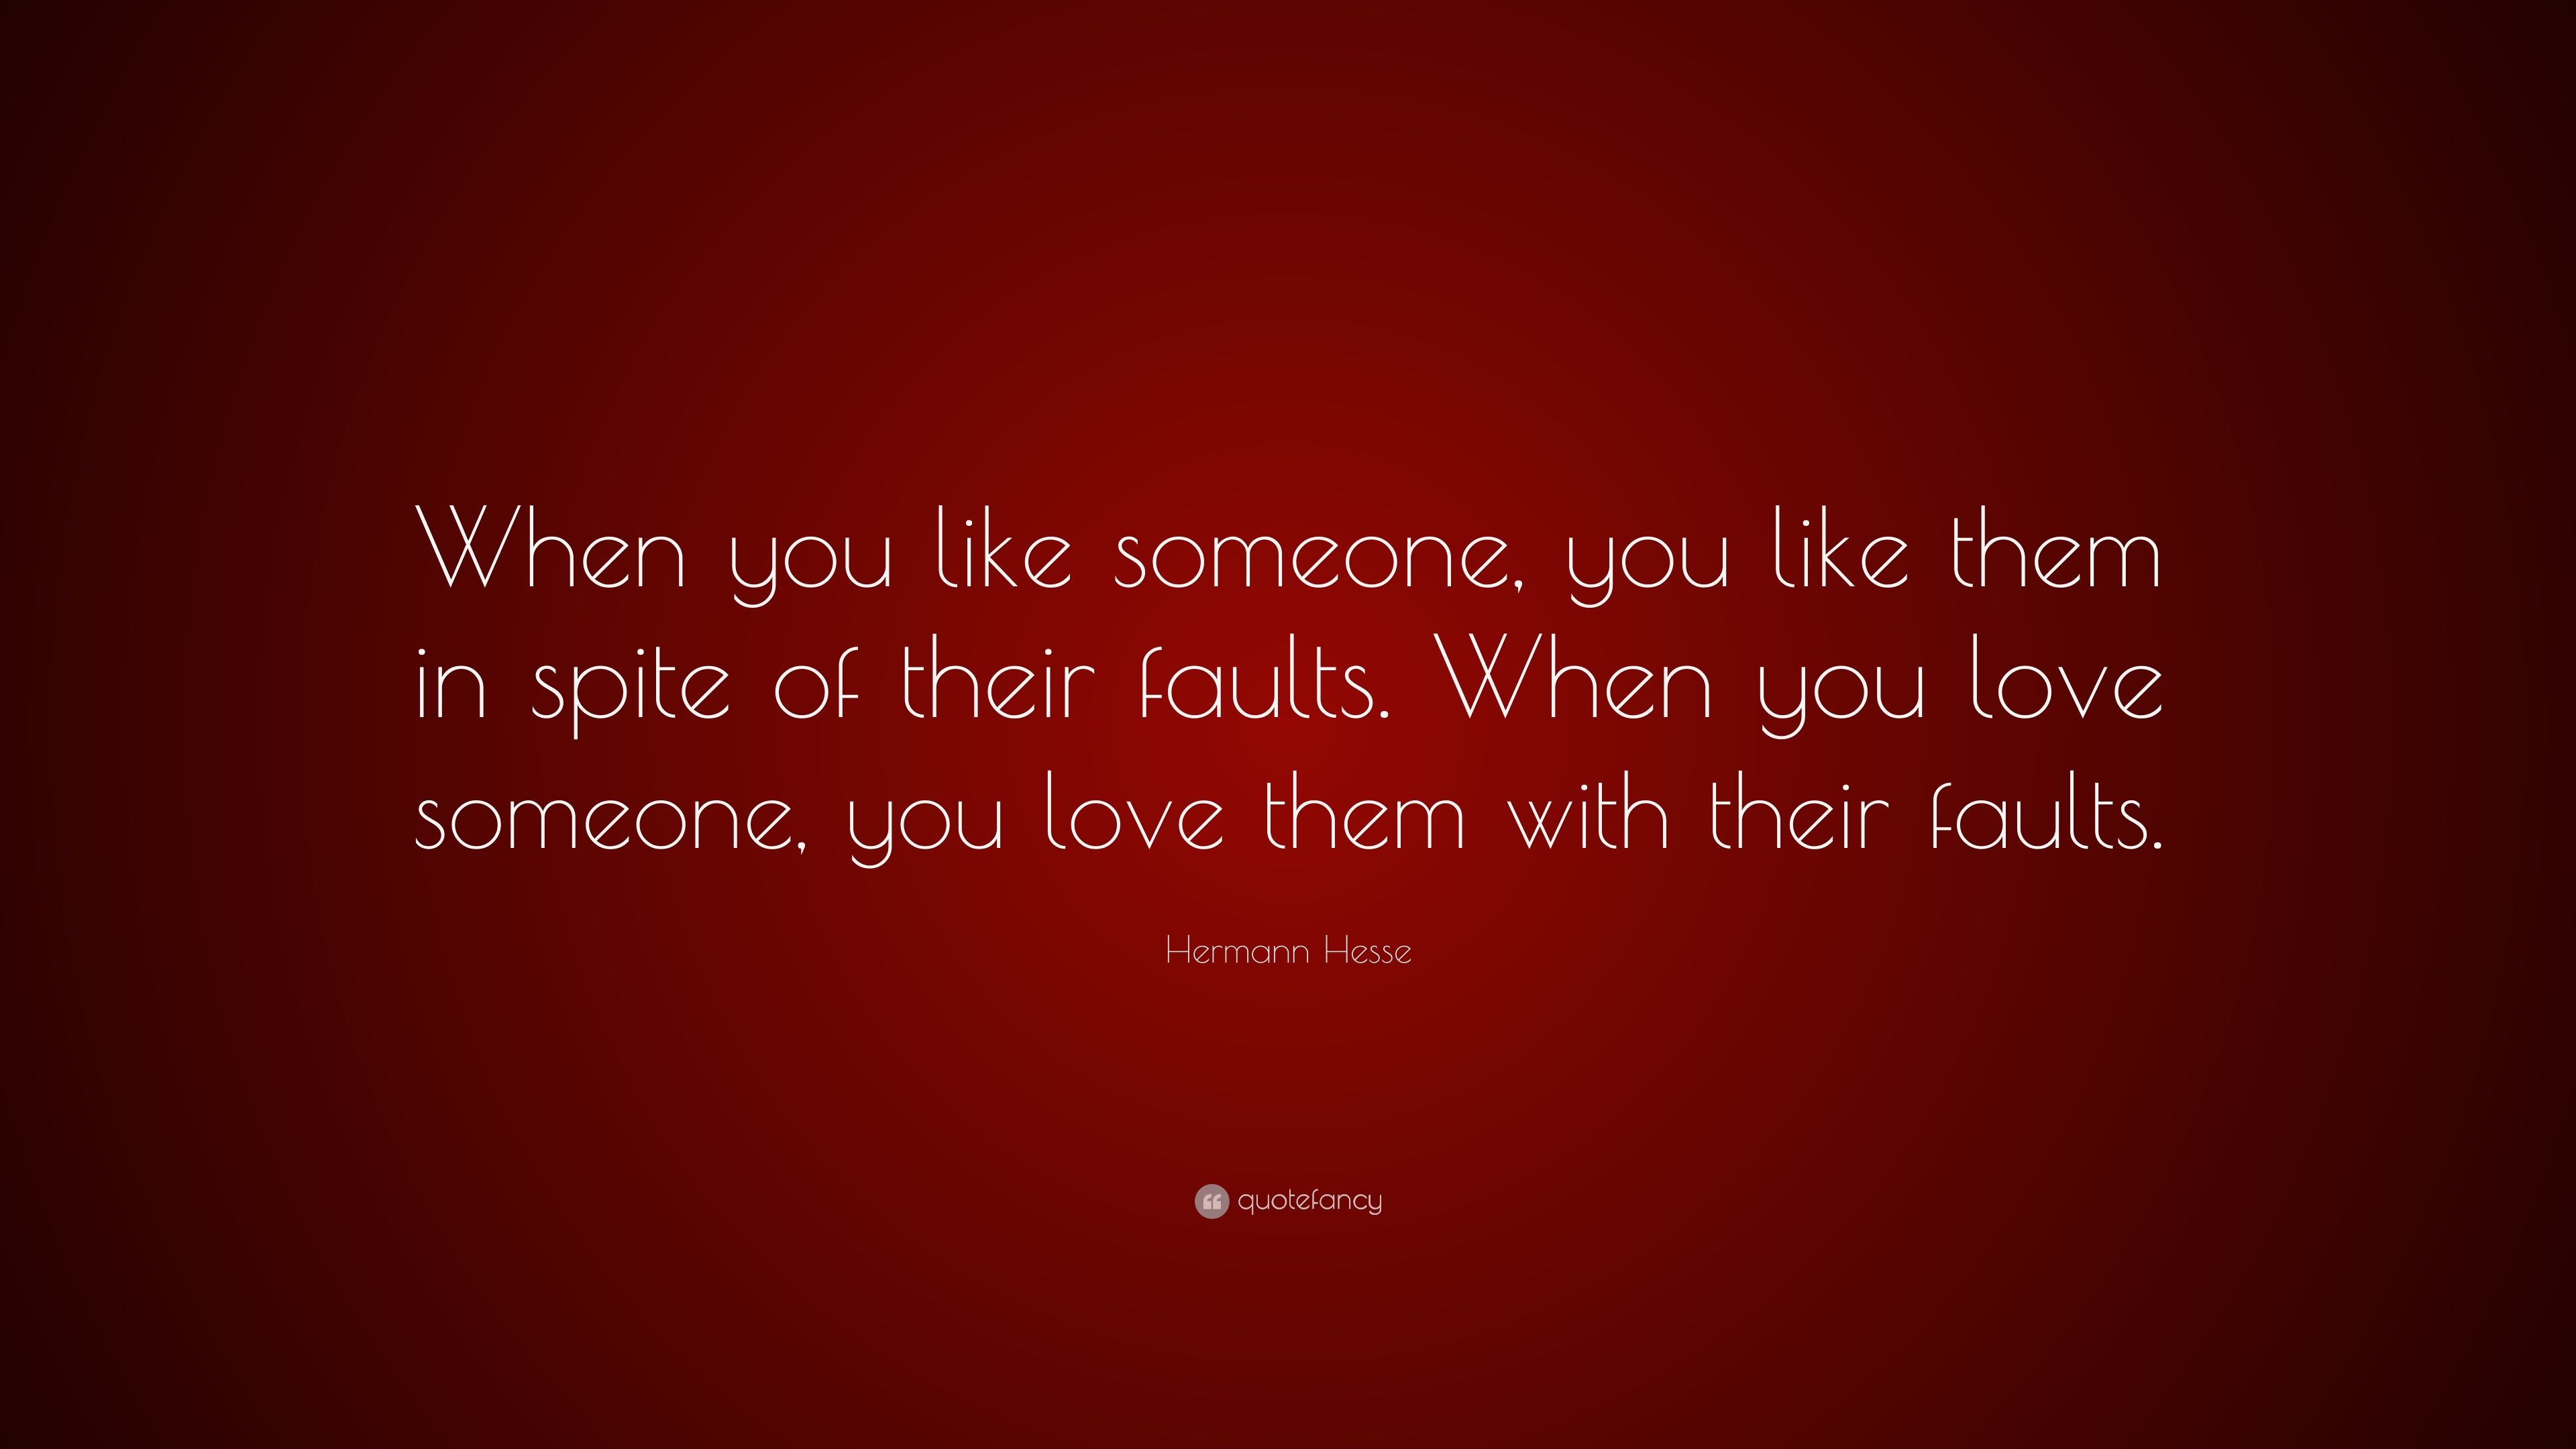 Hermann Hesse Quote: “When you like someone, you like them